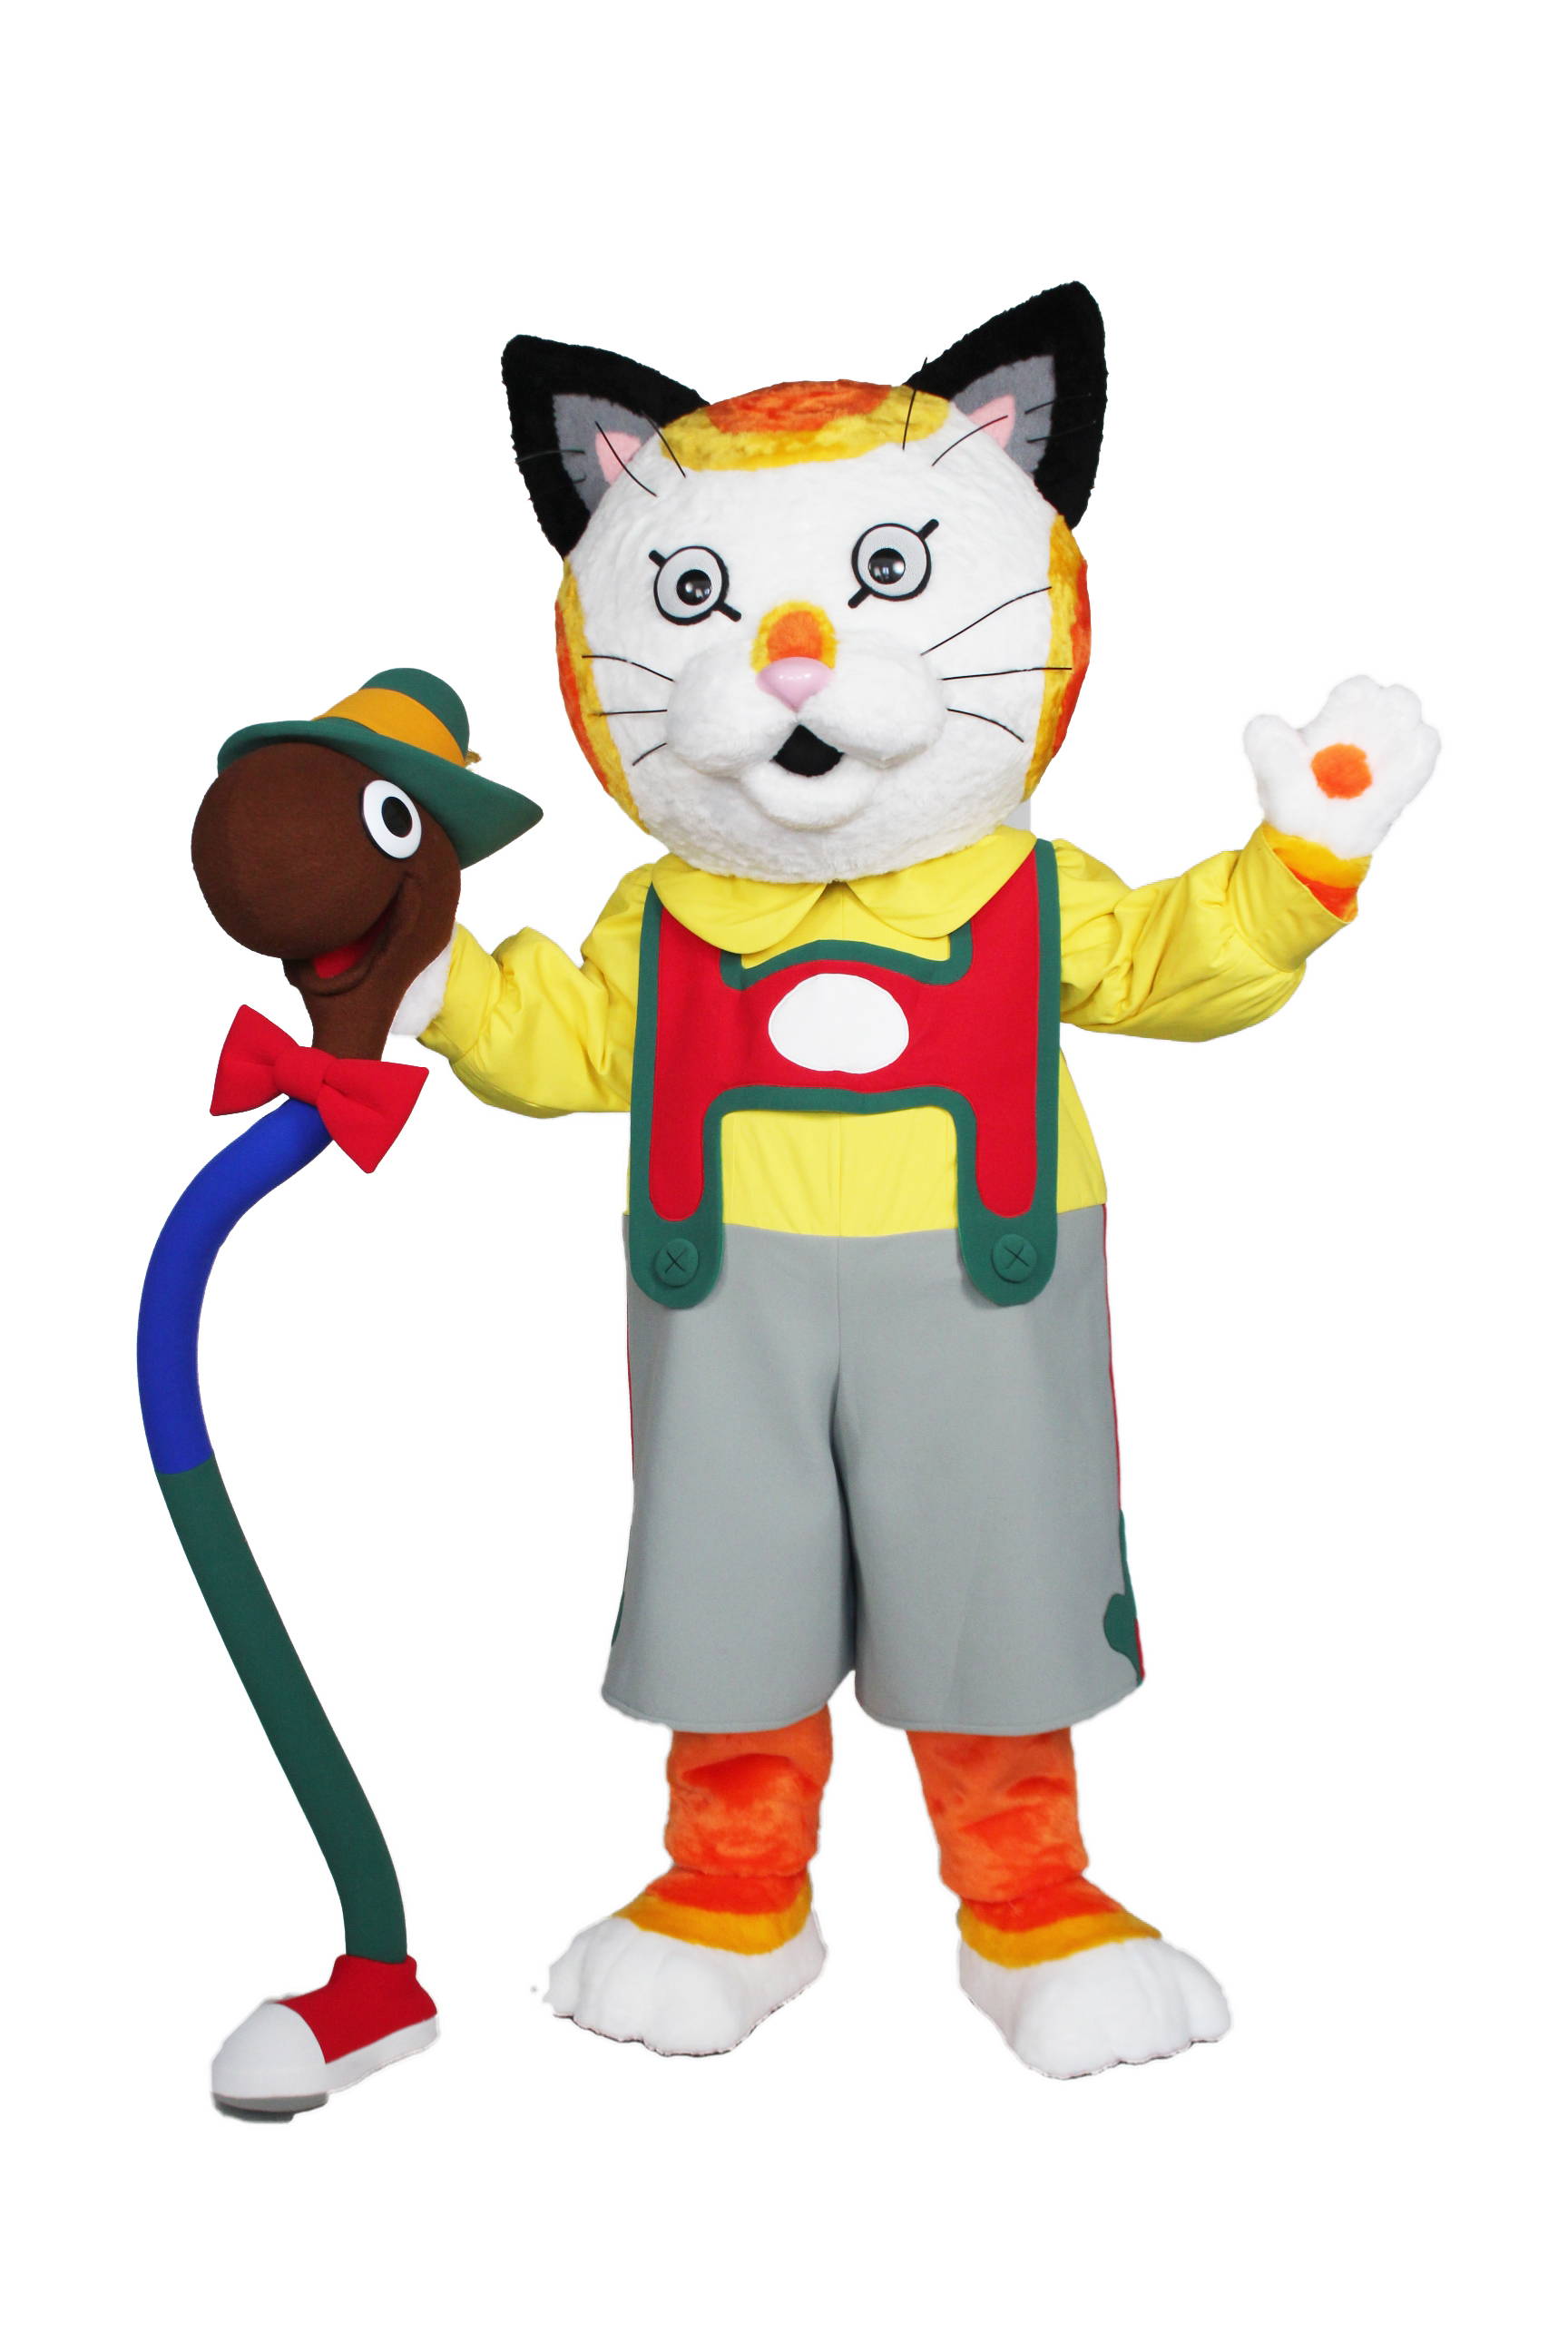 Huckle Cat and Lowly Worm